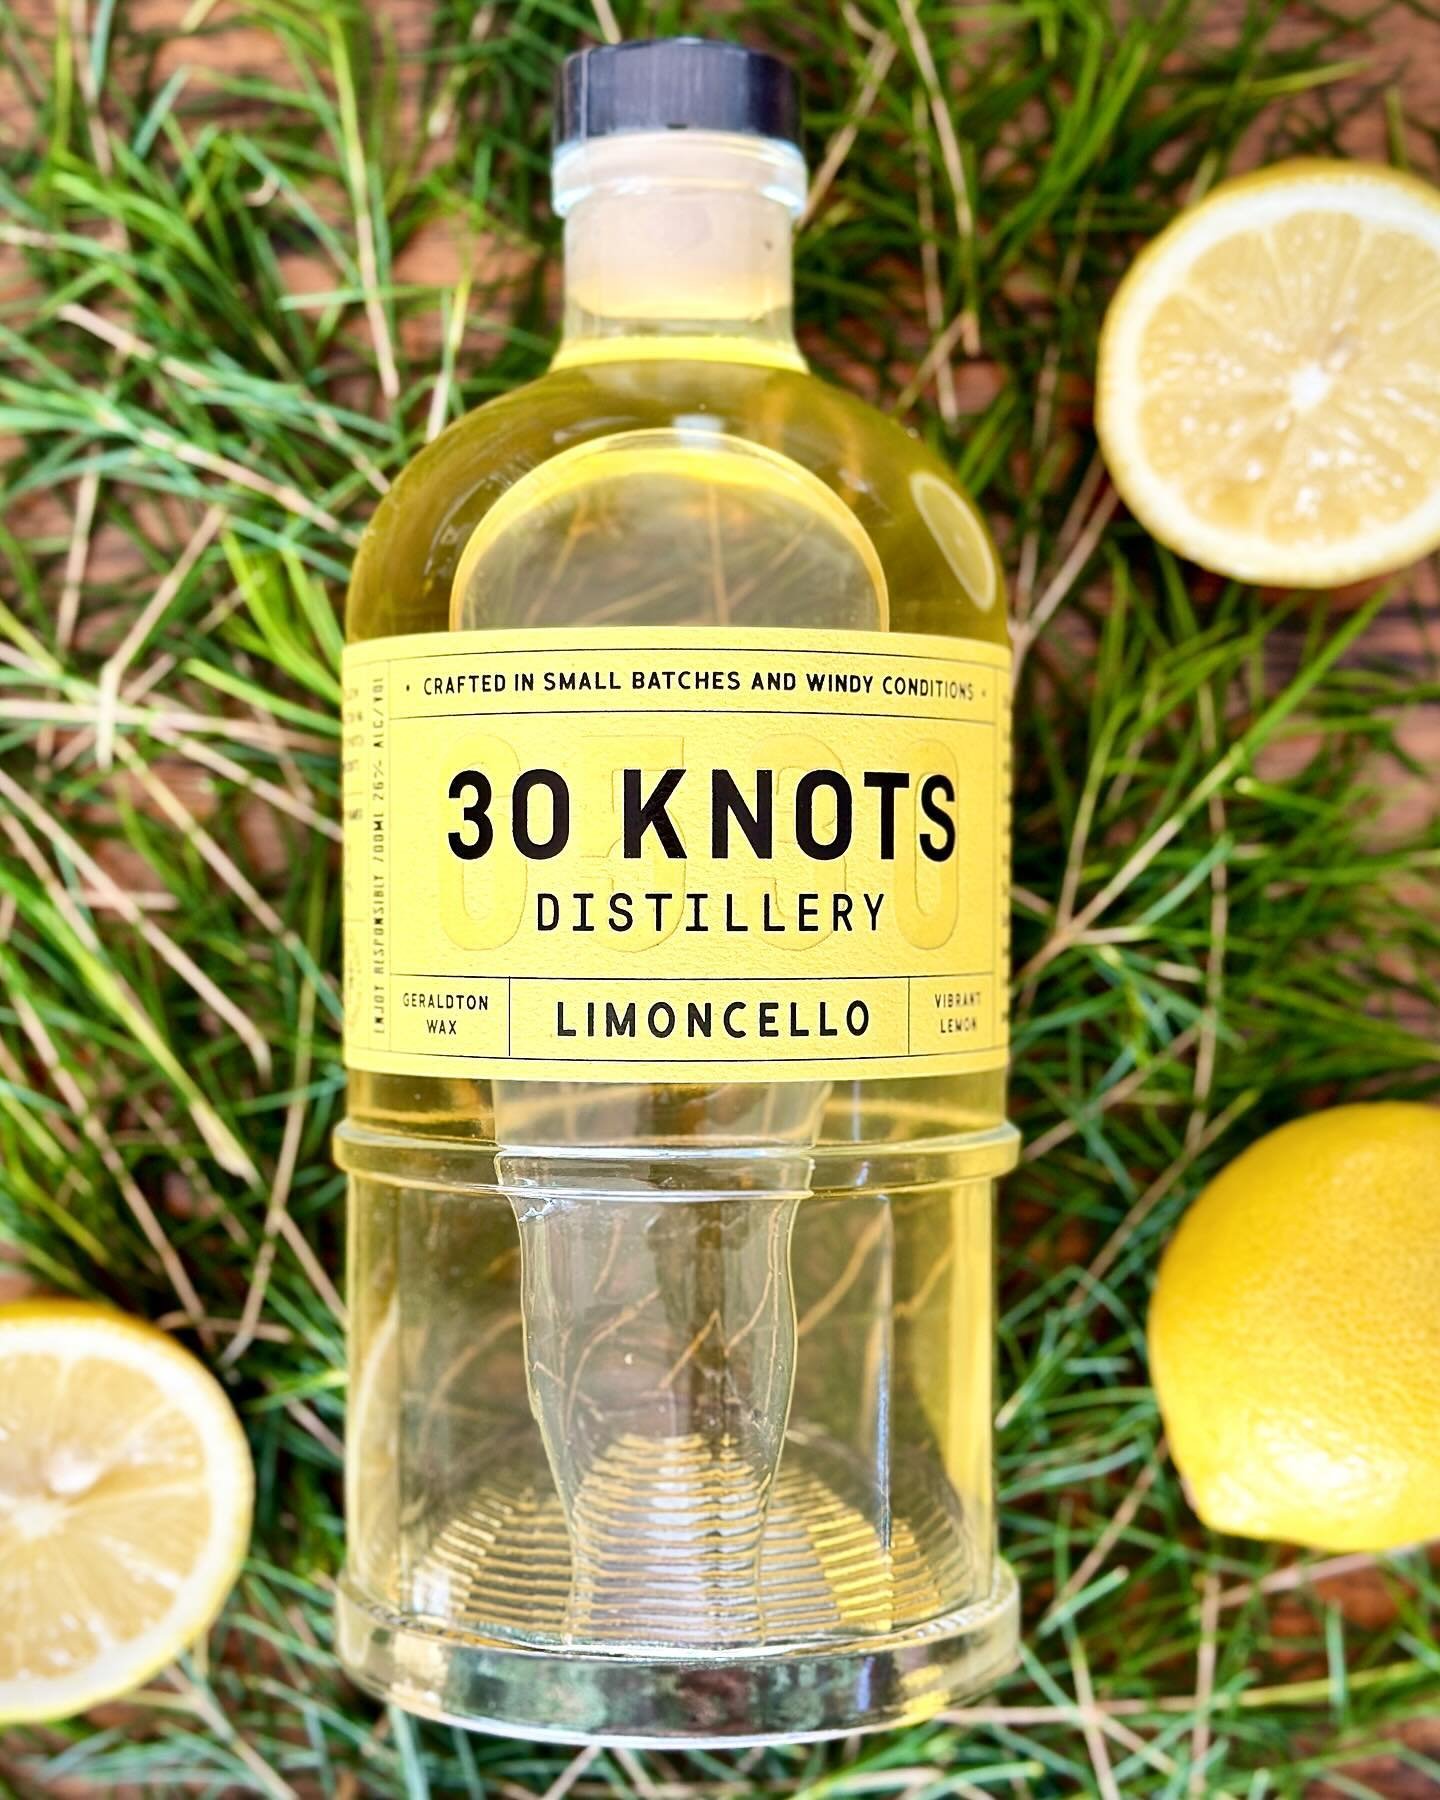 It&rsquo;s back! After three months of soaking up the goodness of vibrant, delicious lemons, our Limoncello Batch 2 is now available for purchase. Infused with Geraldton Wax, it&rsquo;s the perfect refreshing drink for any occasion.

But hurry! Stock